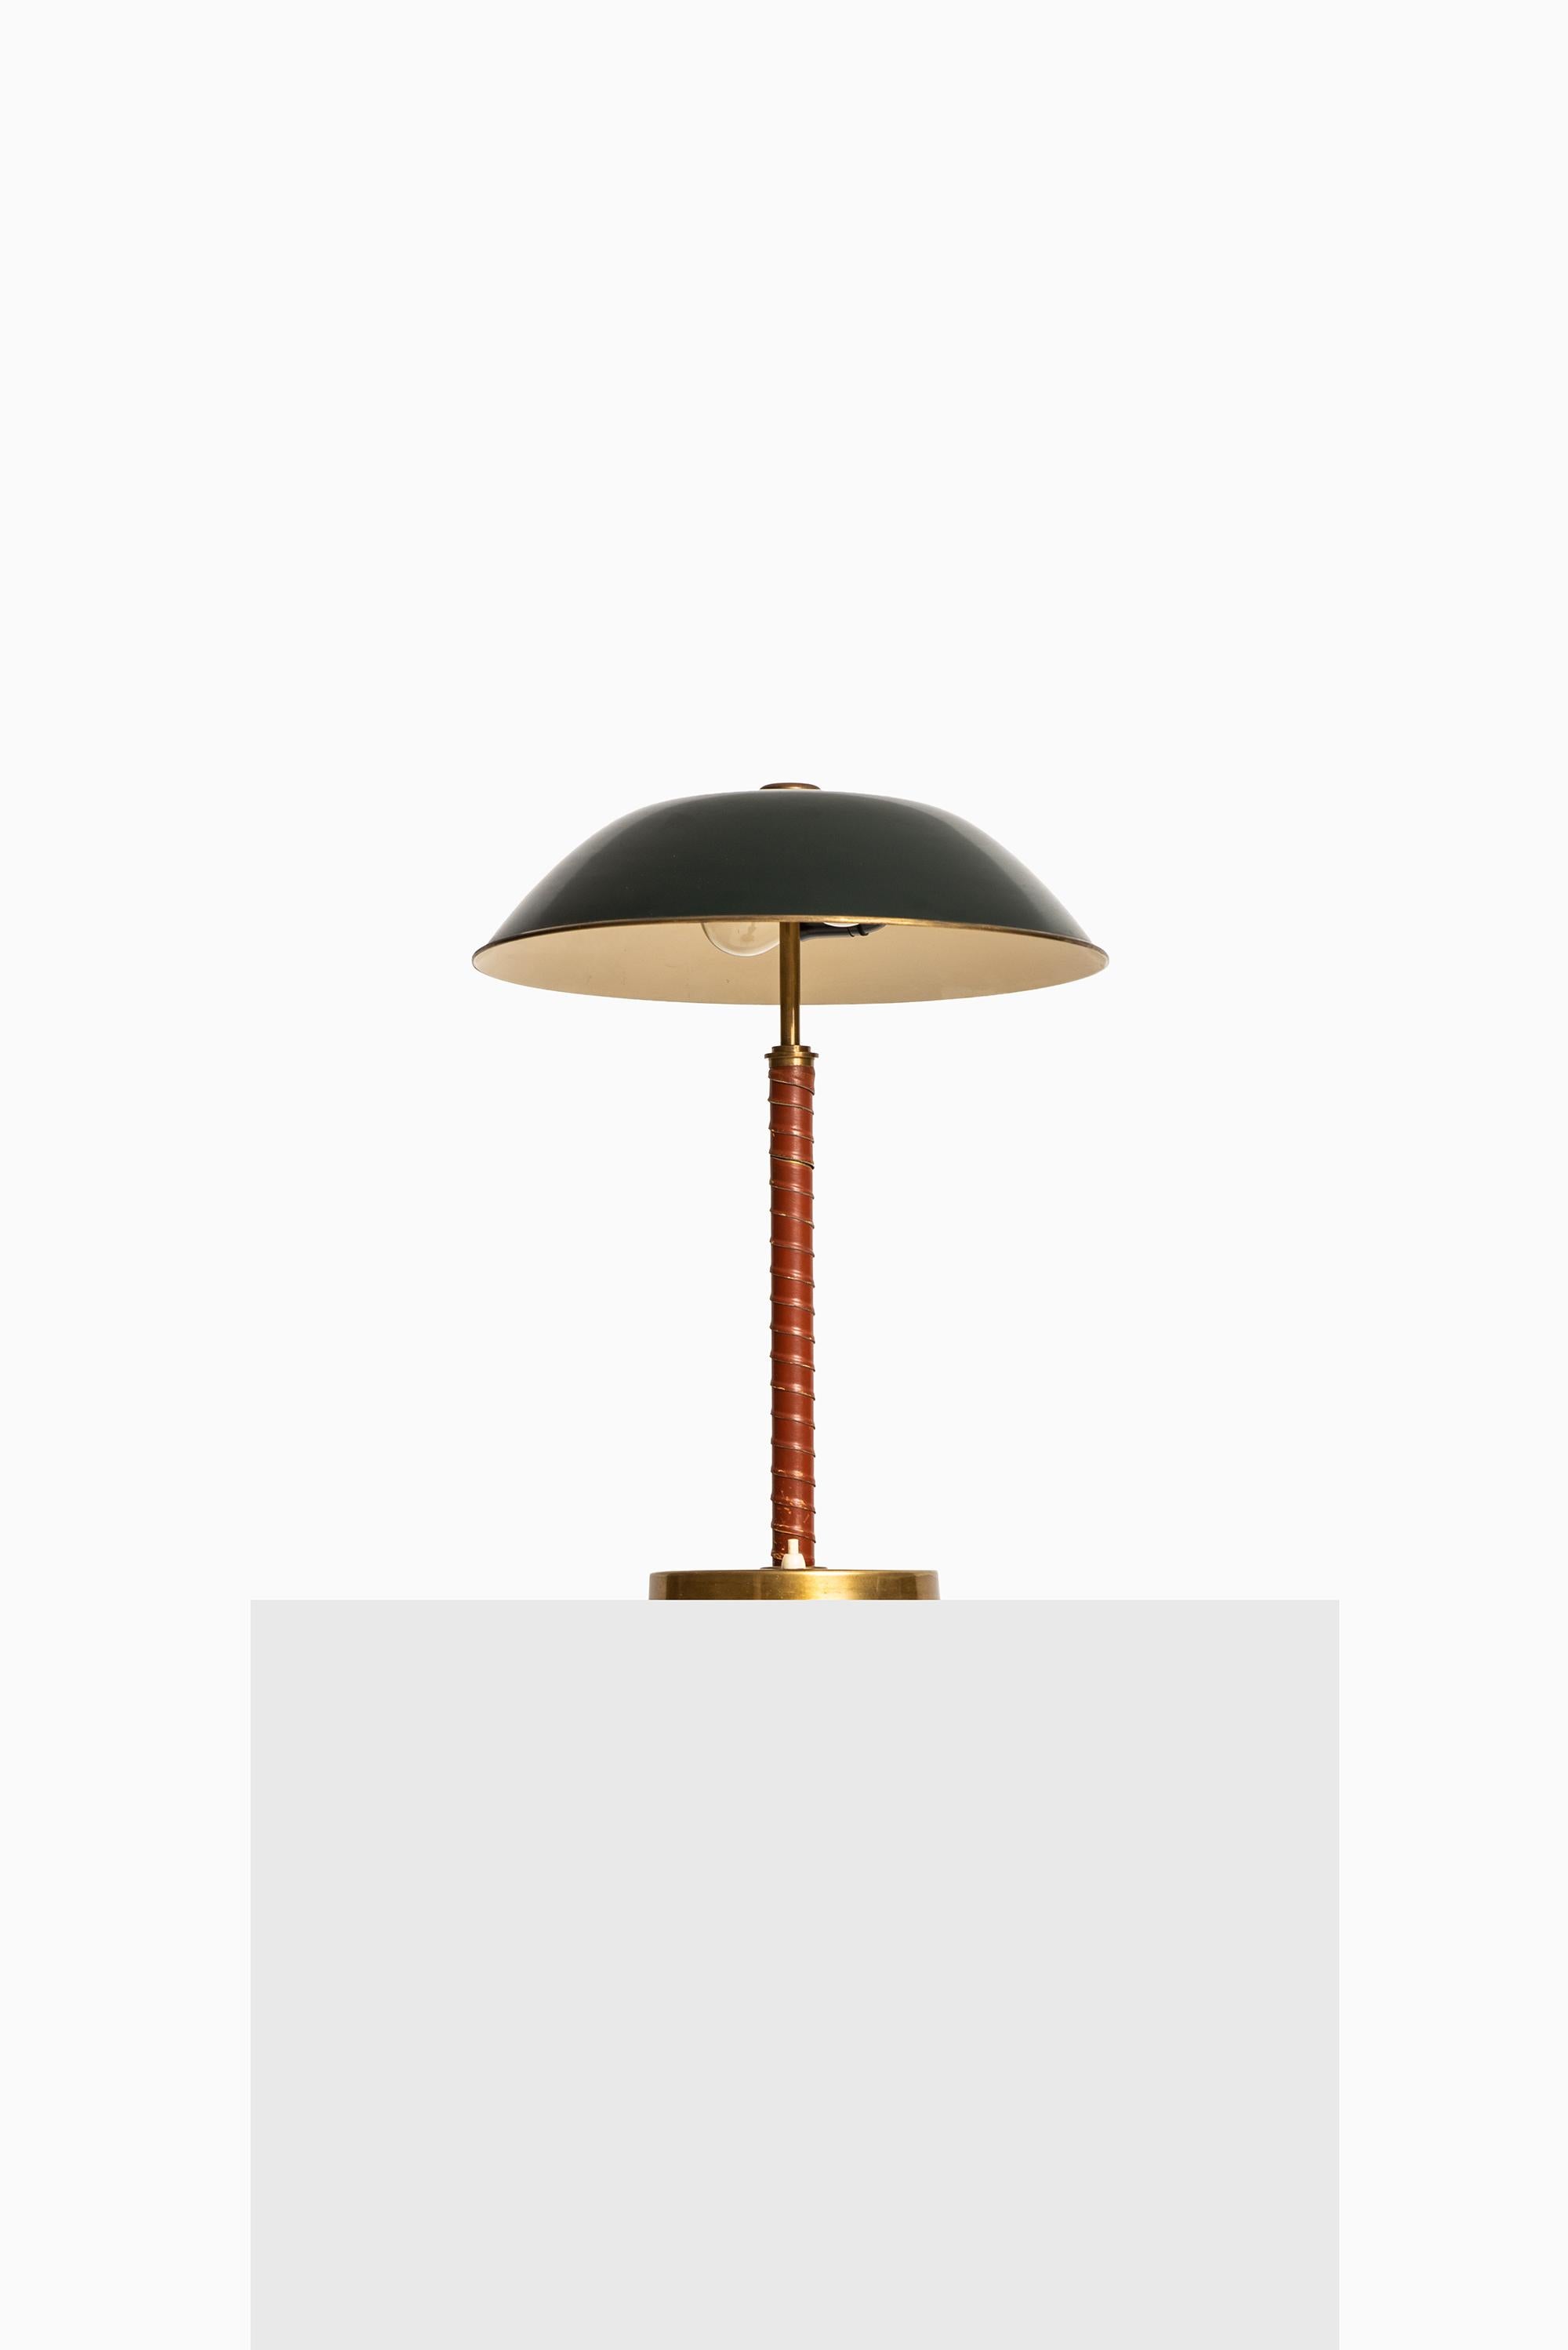 Rare table lamp attributed to Harald Notini. Produced by Böhlmarks in Sweden.